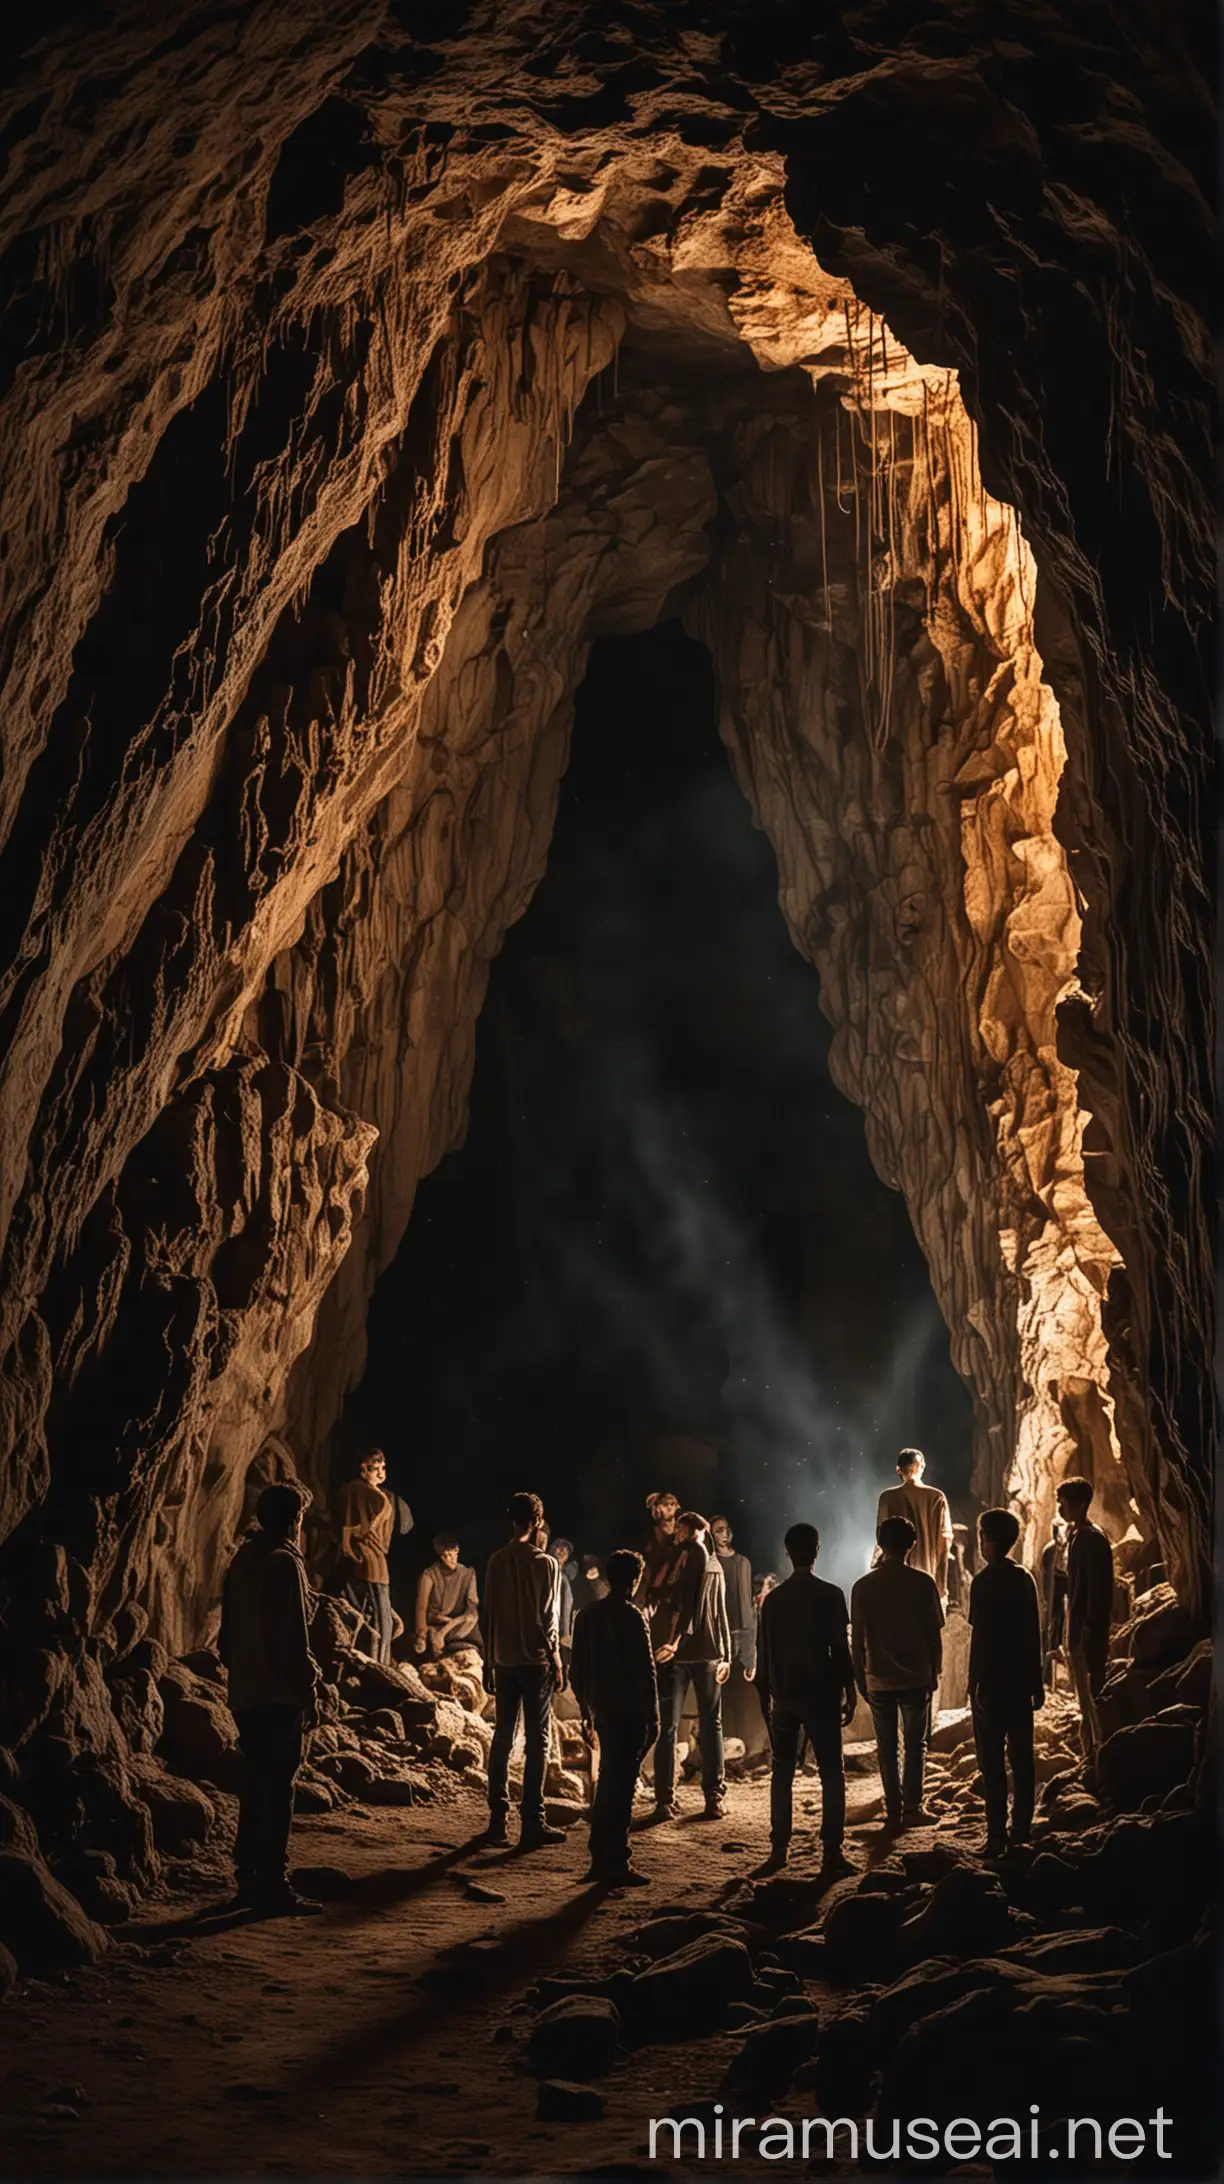 Seven young men standing at the entrance of the cave, depicting the mysterious atmosphere inside the dark cave.
